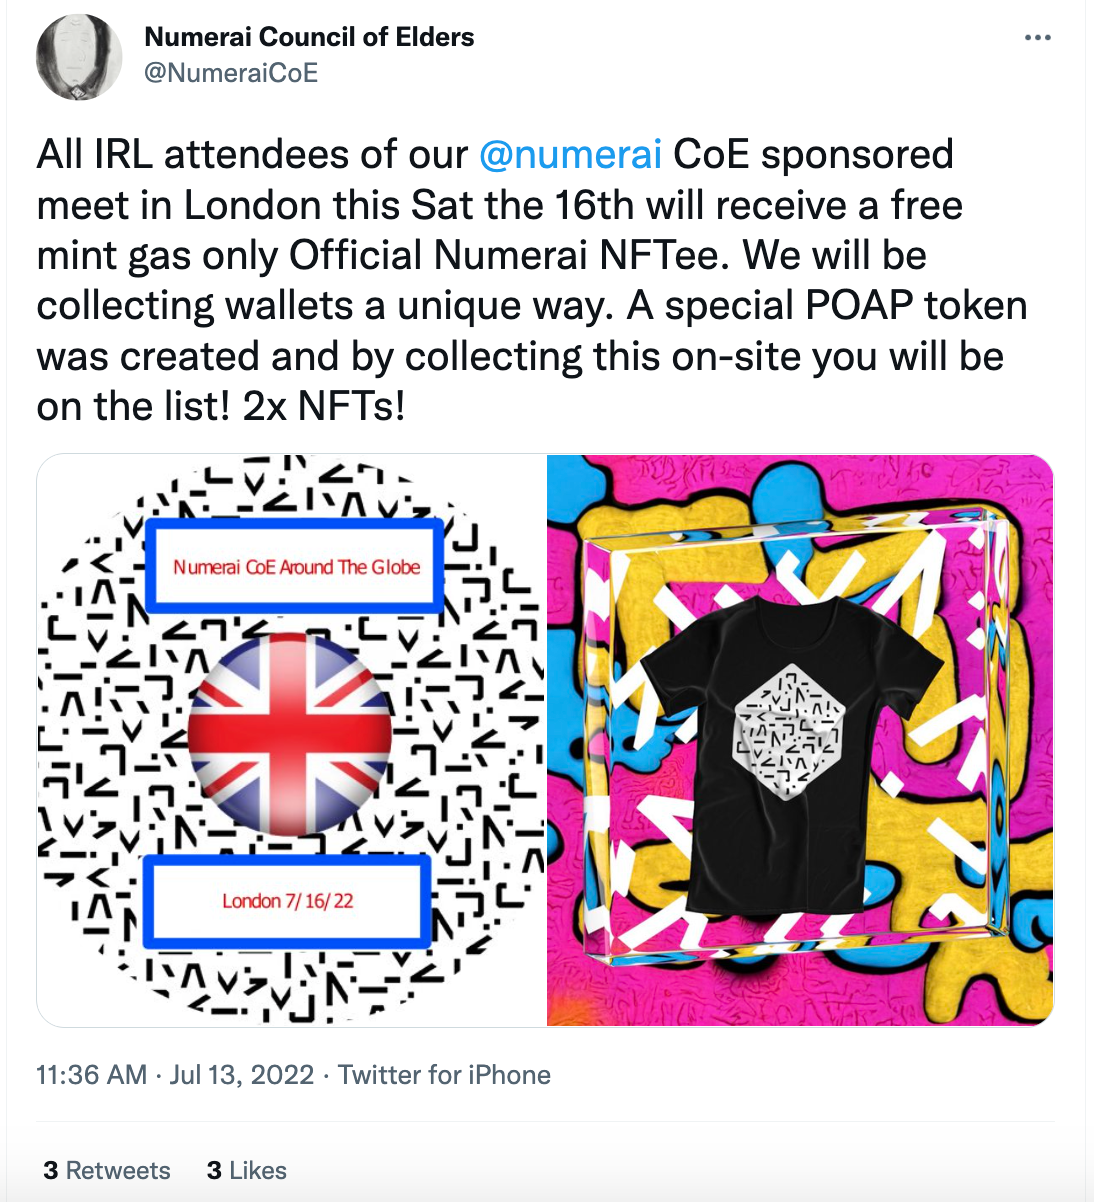 Numerai consistently seeks out opportunities to reward contributors to their project in unique ways, including through this recent campaign giving away free “NFTees.” (via: https://twitter.com/NumeraiCoE/status/1547243673519214593)